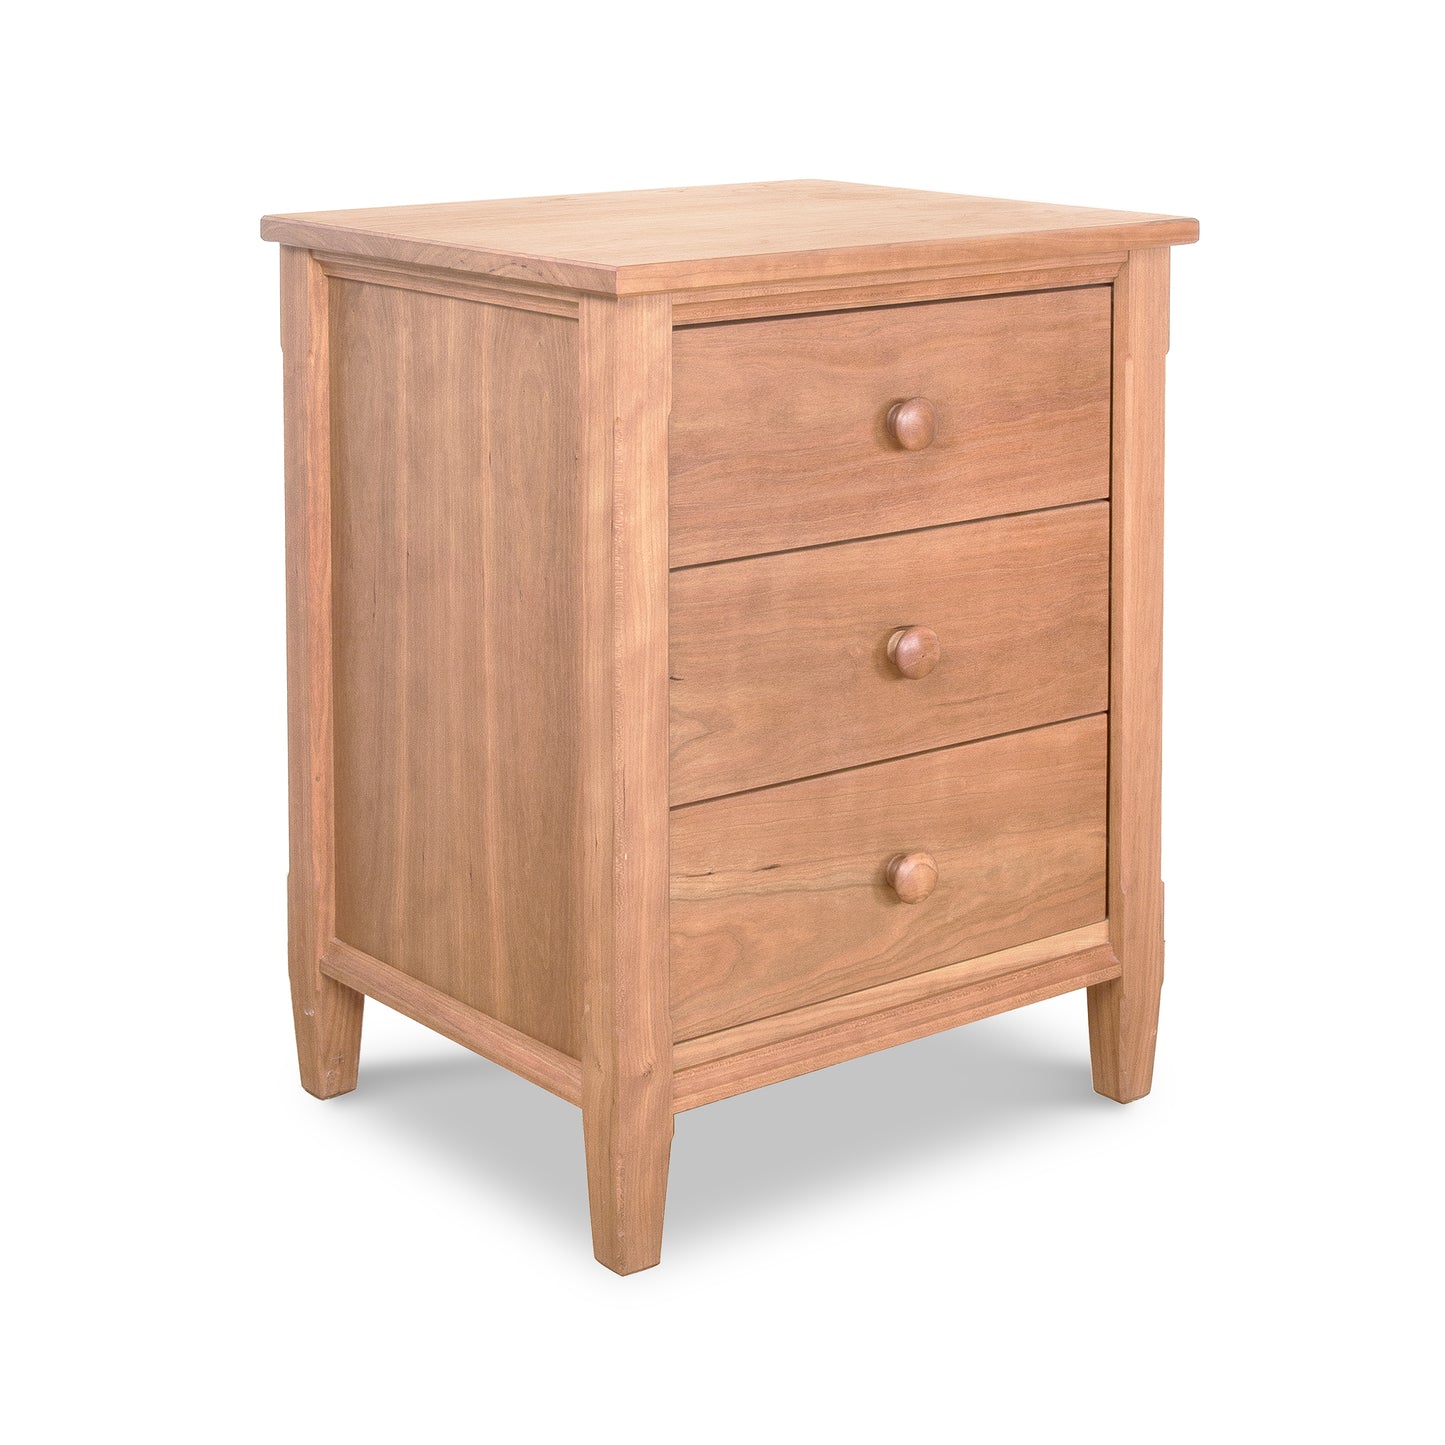 A wooden three-drawer Maple Corner Woodworks Vermont Shaker Nightstand with round knobs on a white background. The nightstand features a smooth finish and stands on four sturdy legs.